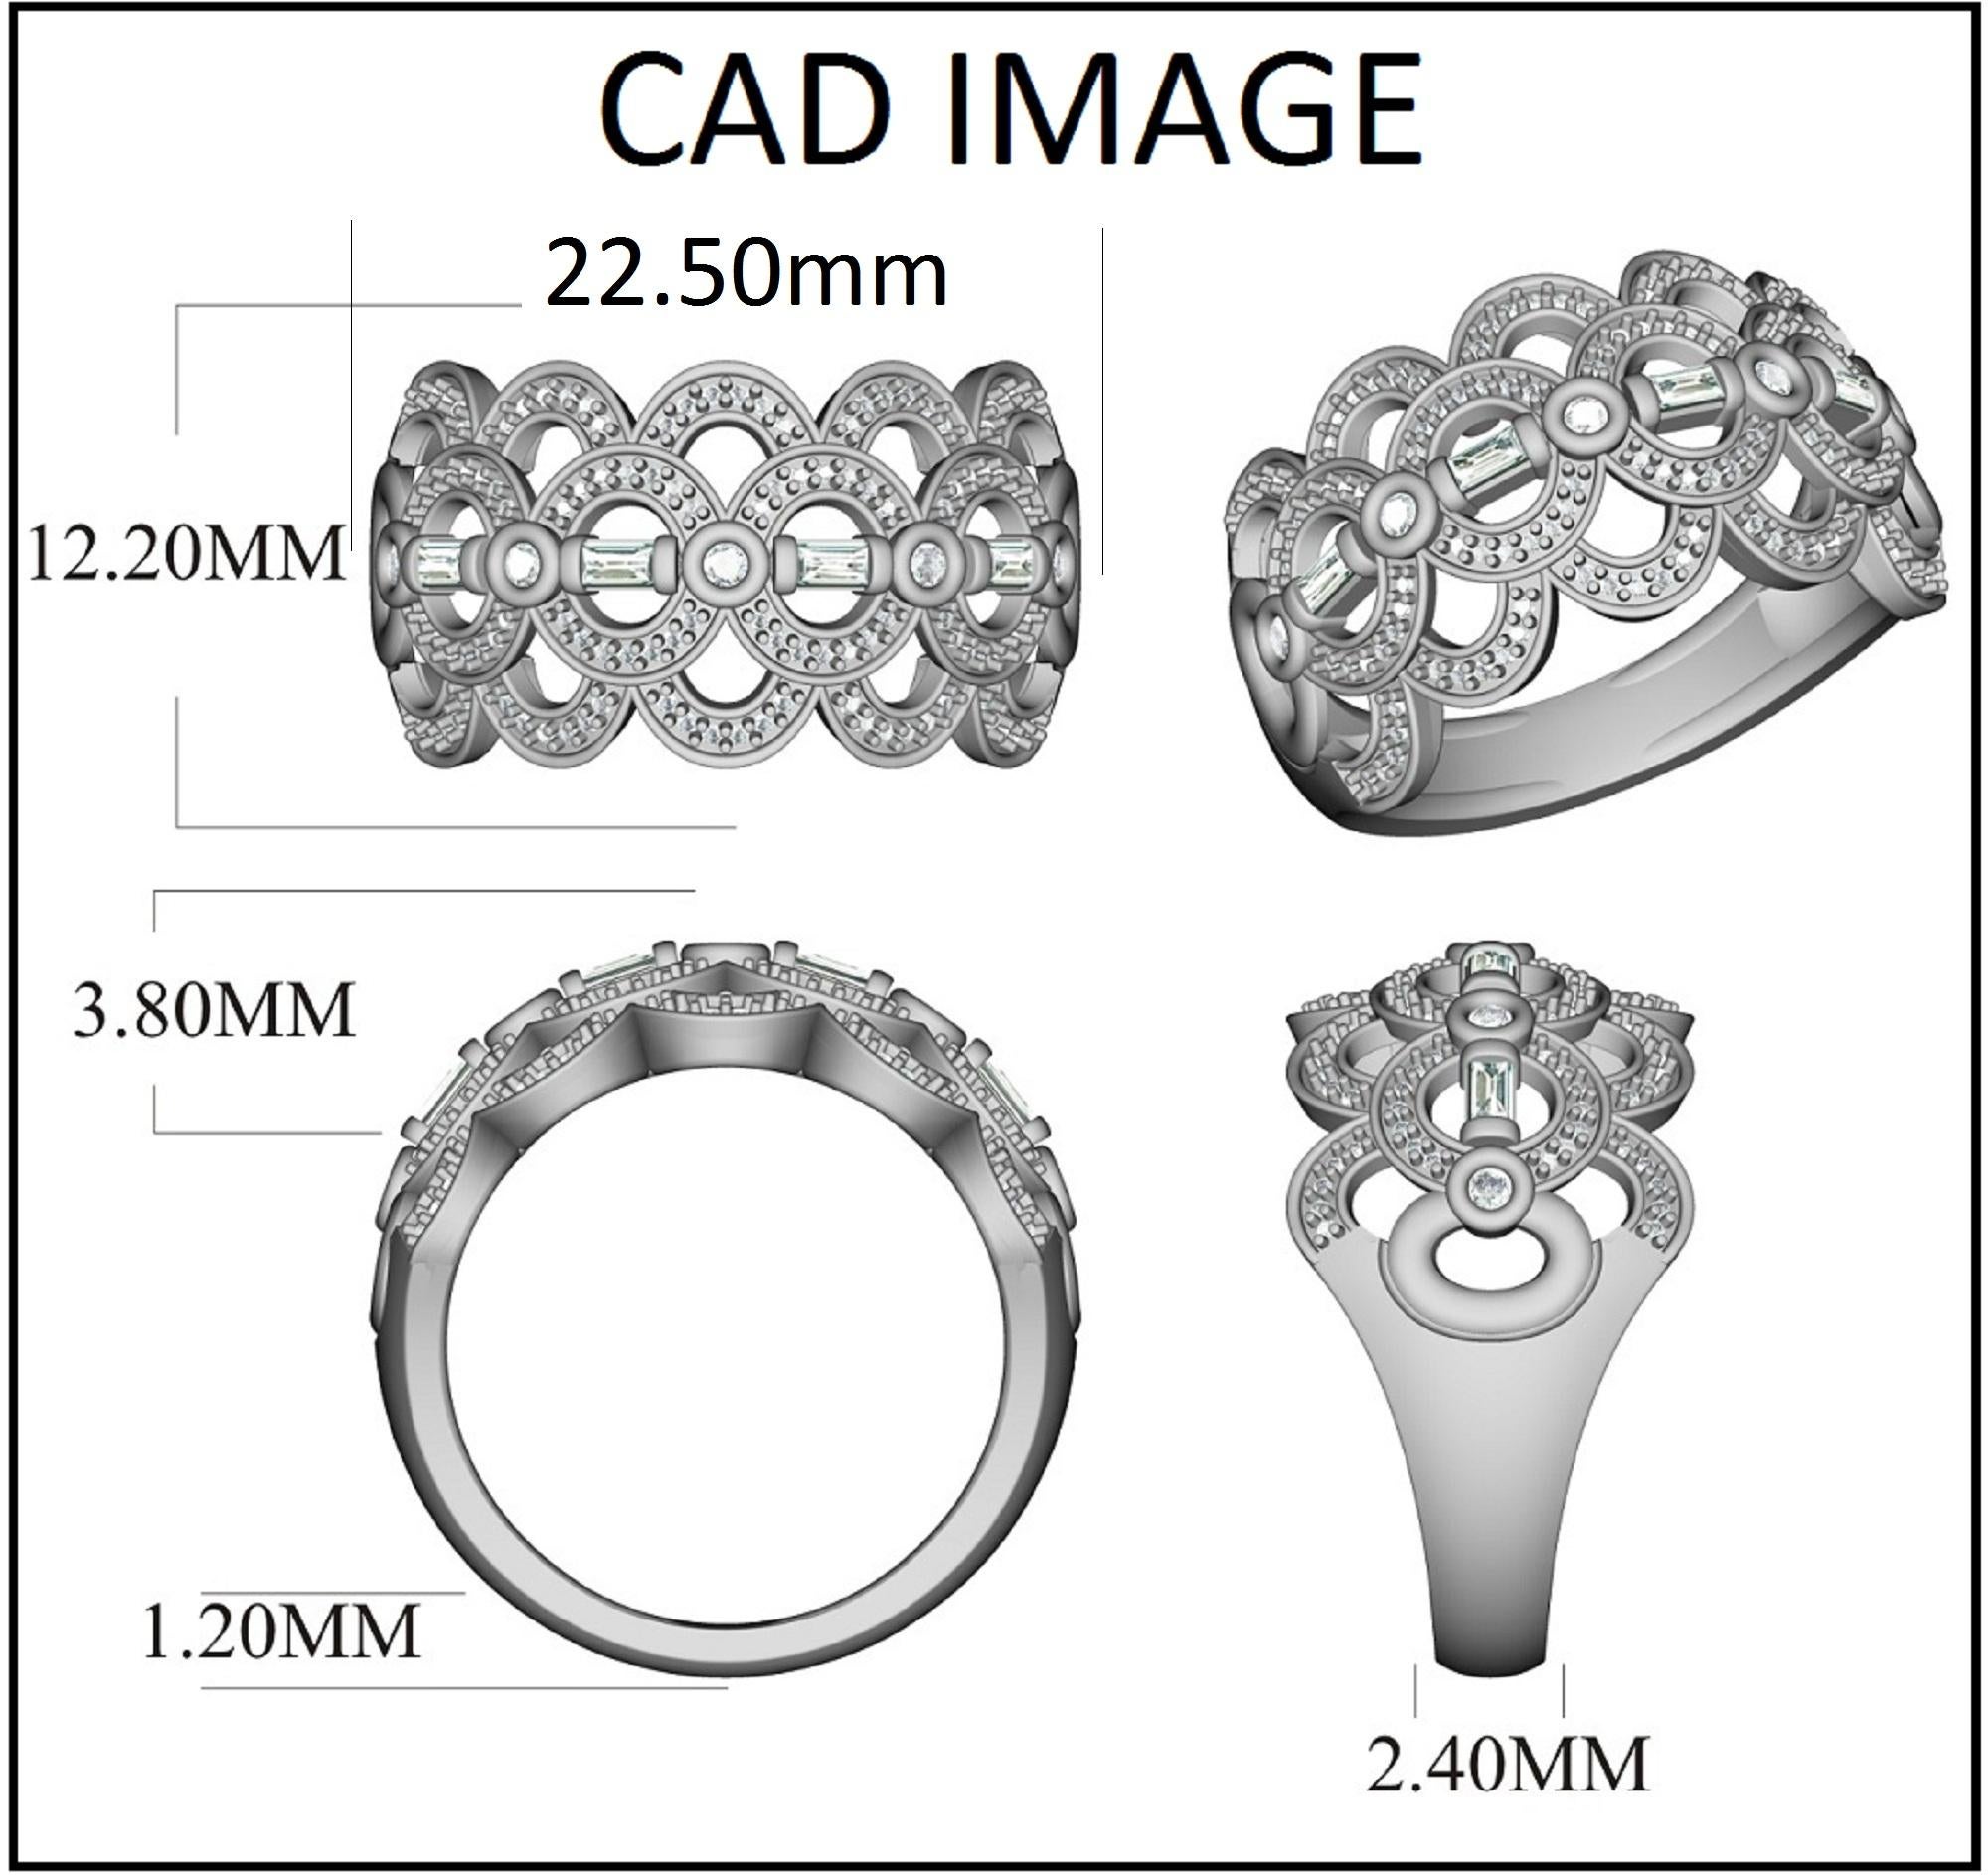 This Floral shaped Wide Band Ring is expertly crafted in 14 Karat White Gold and features with 117 sparkling round and 4 baguette cut diamond set in prong setting. We only use 100% natural and conflict free diamonds which sparkles in H-I color I1